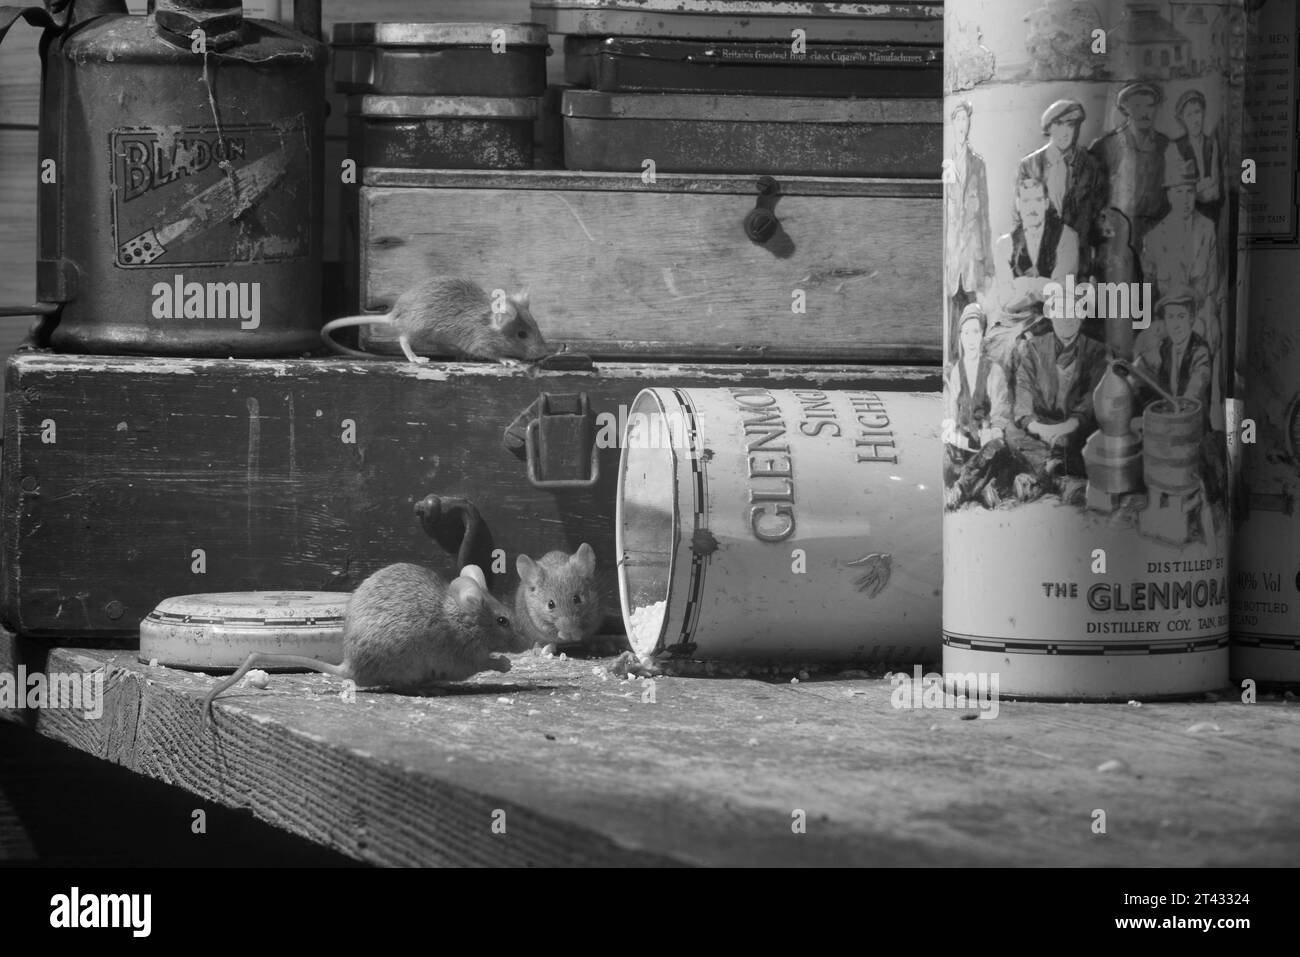 House mouse (Mus musculus), Greater Manchester, Regno Unito. Foto Stock